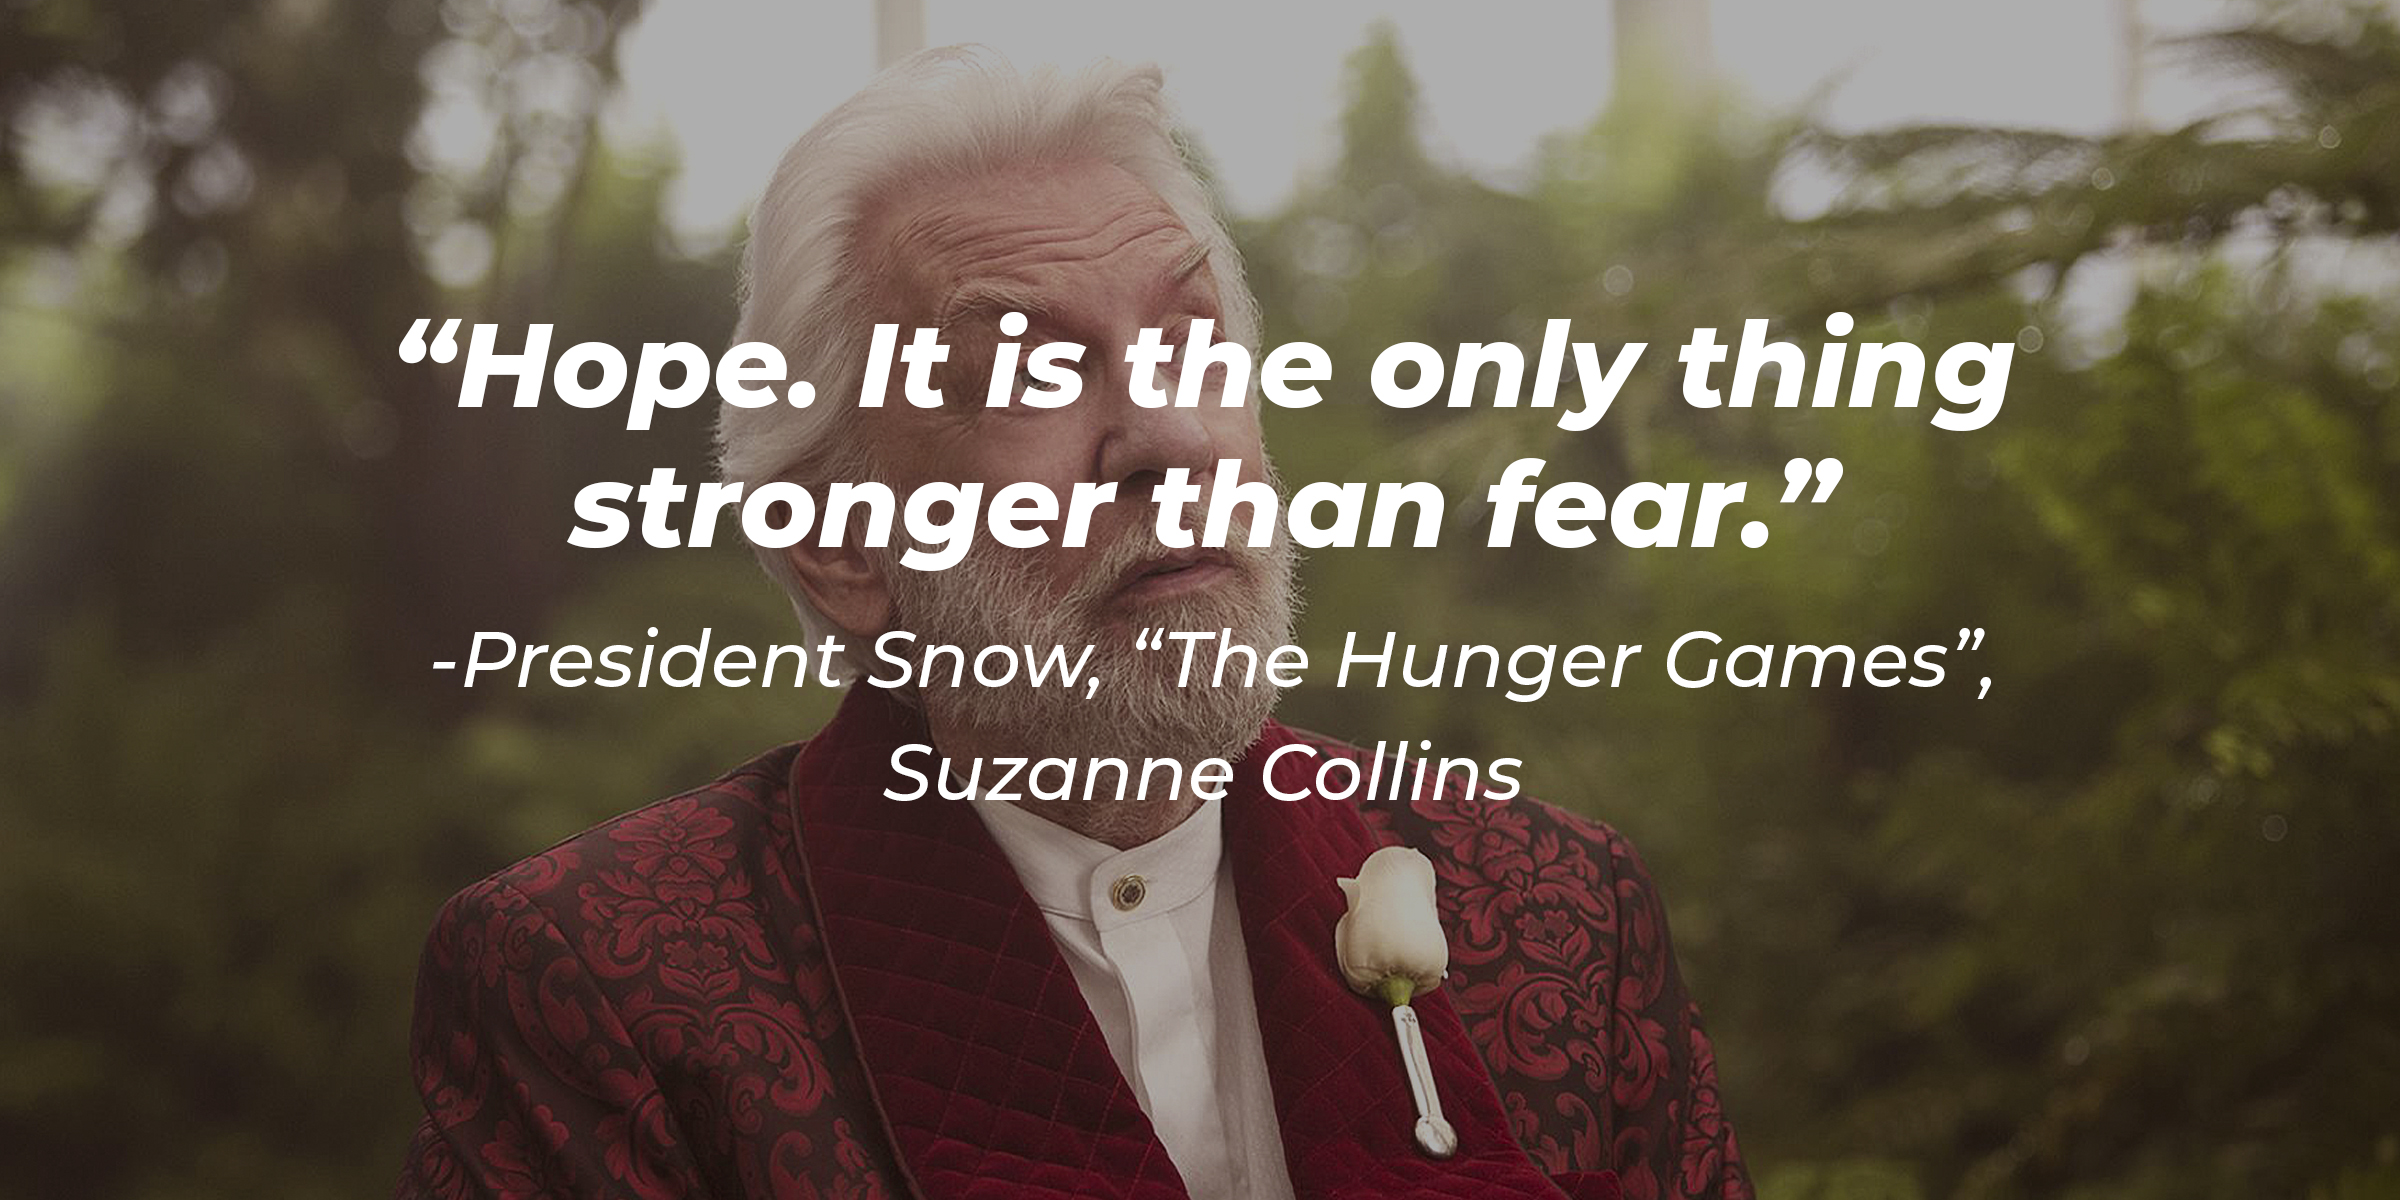 President Snow, with his quote from Suzanne Collins' “Hunger Games”: “Hope. It is the only thing stronger than fear.” | Source: facebook.com/TheHungerGamesMovie